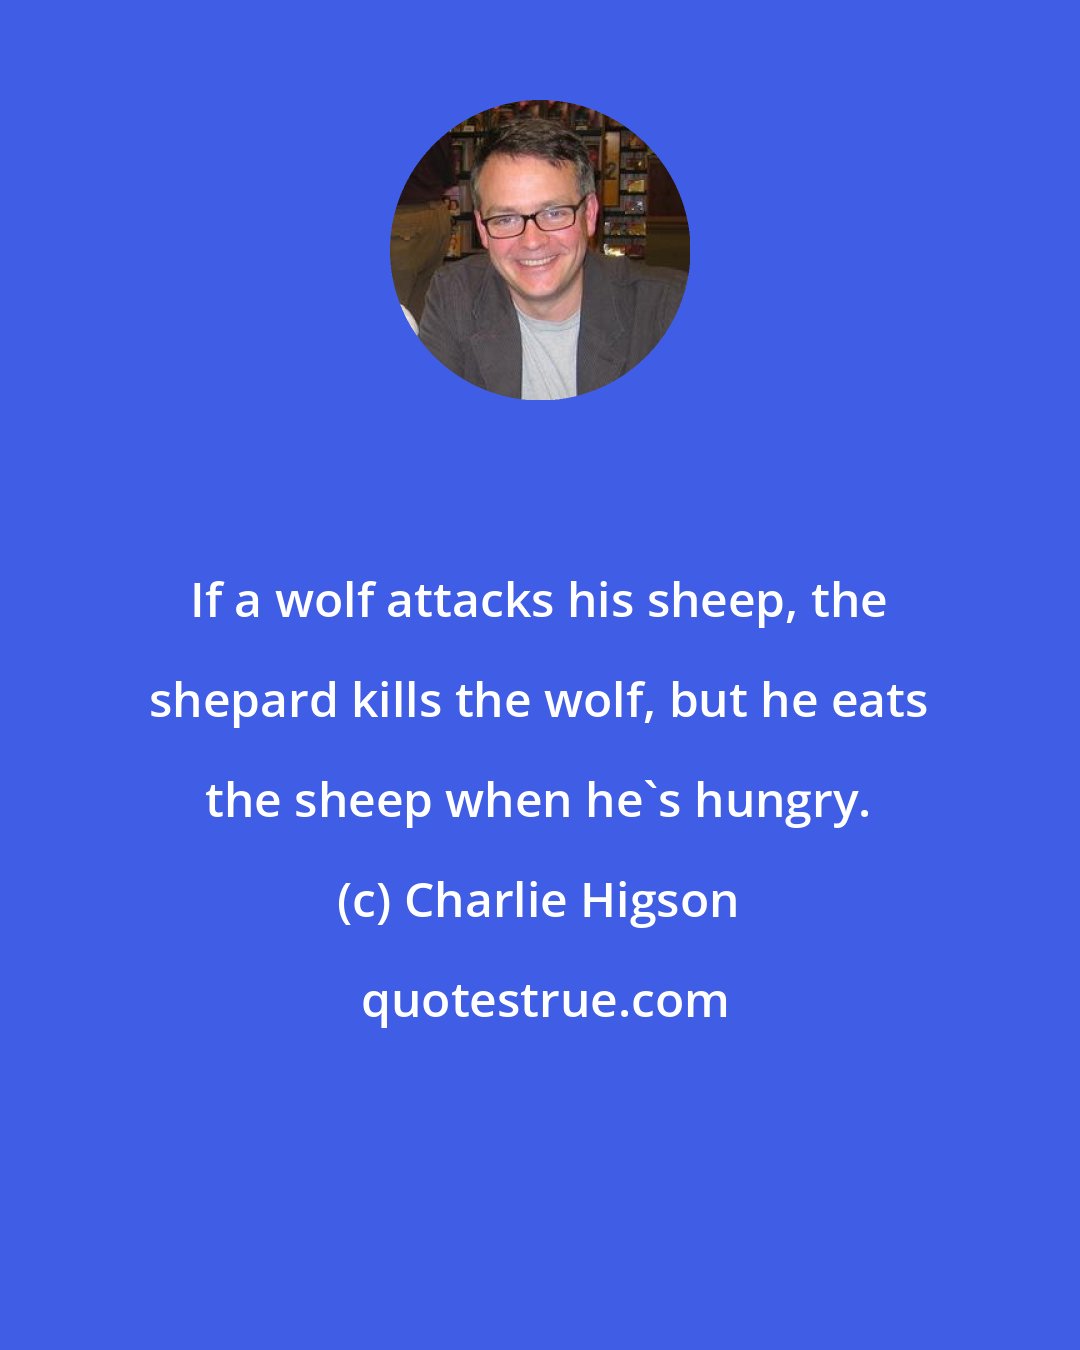 Charlie Higson: If a wolf attacks his sheep, the shepard kills the wolf, but he eats the sheep when he's hungry.